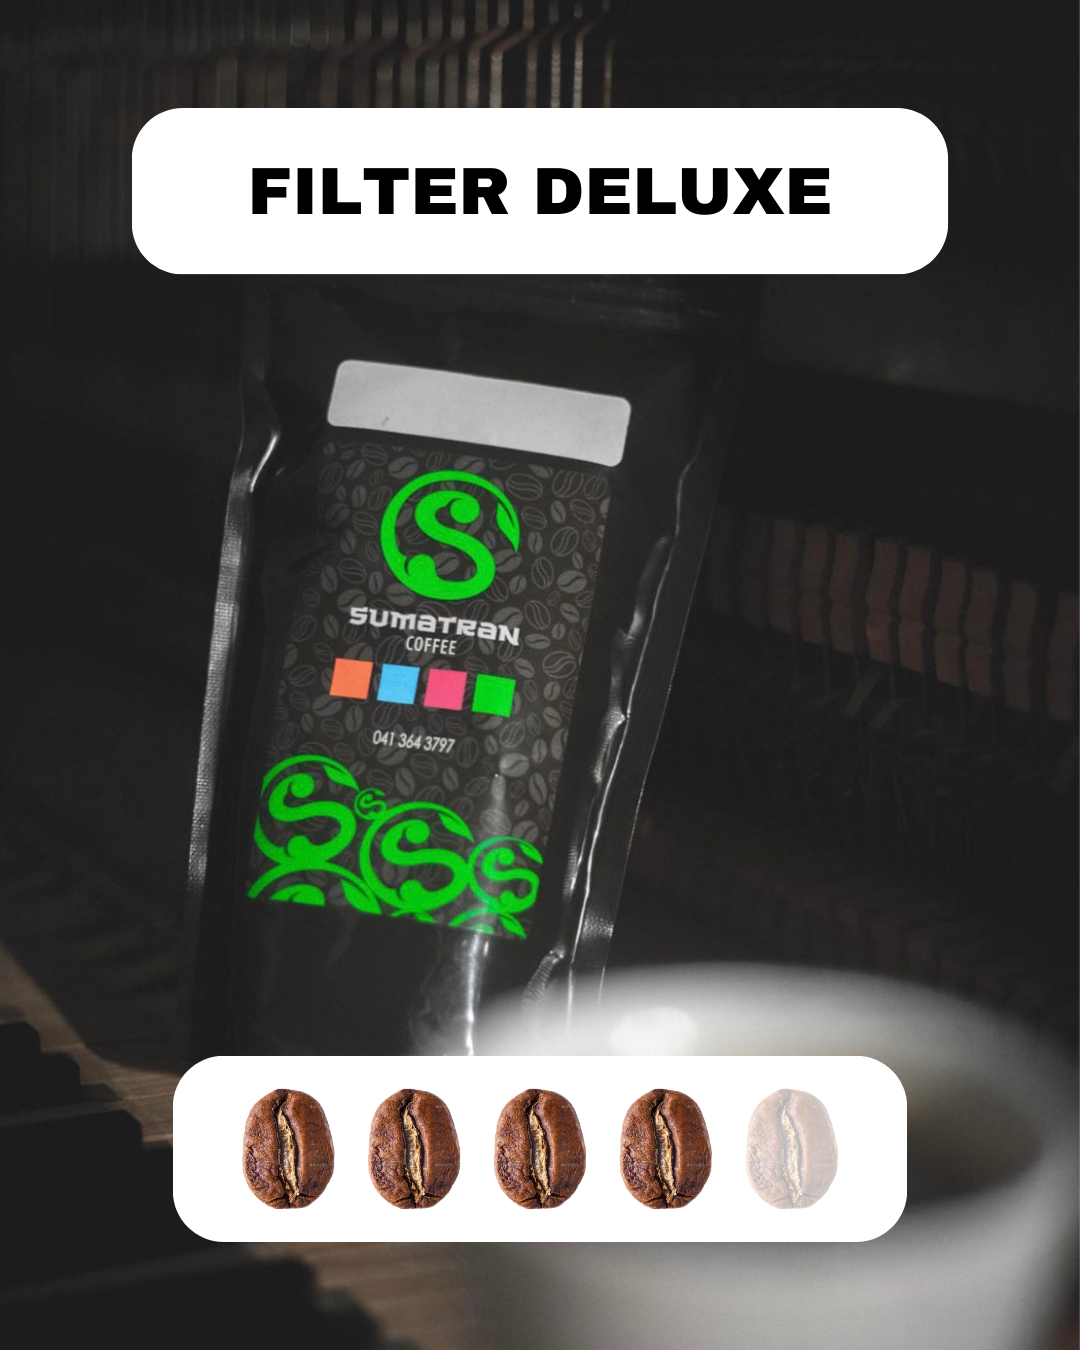 Fresh bag of Filter Deluxe coffee